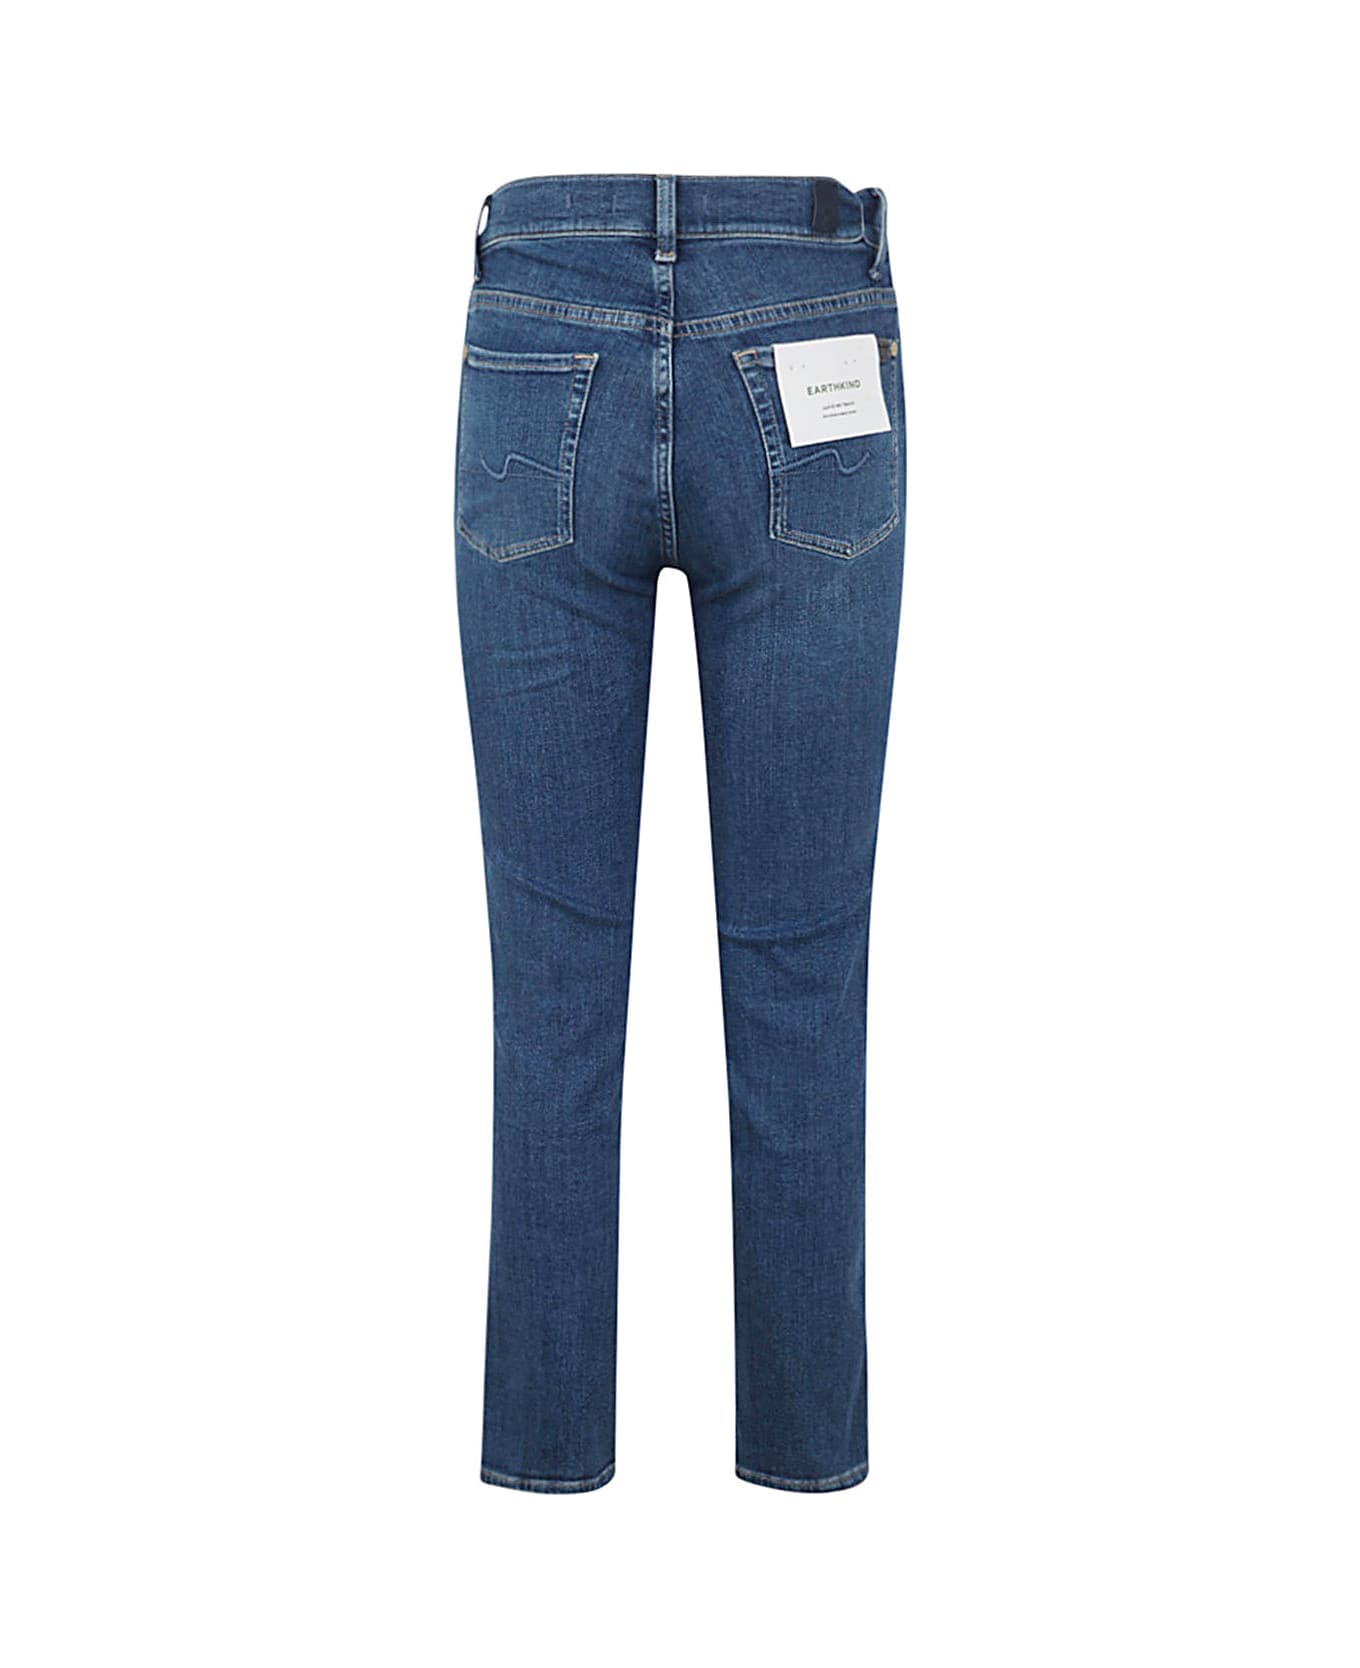 7 For All Mankind The Straight Crop Slim Illusion Saturday - Mid Blue